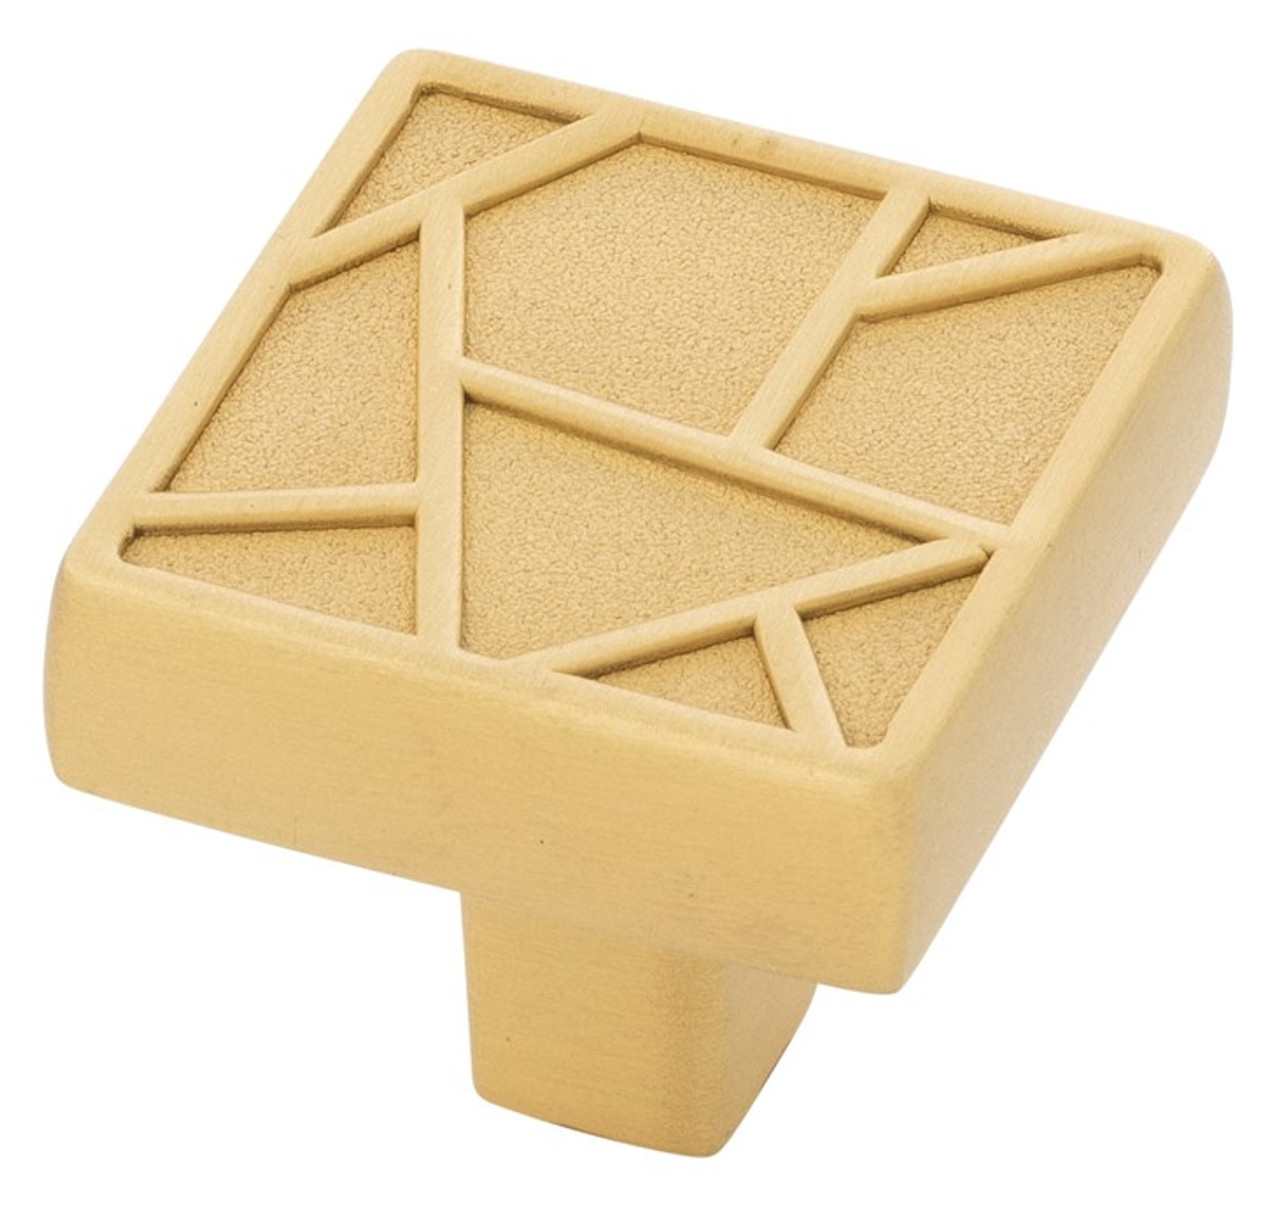 Belwith Keeler Cullet Series 1-3/8" Inch Square Knob